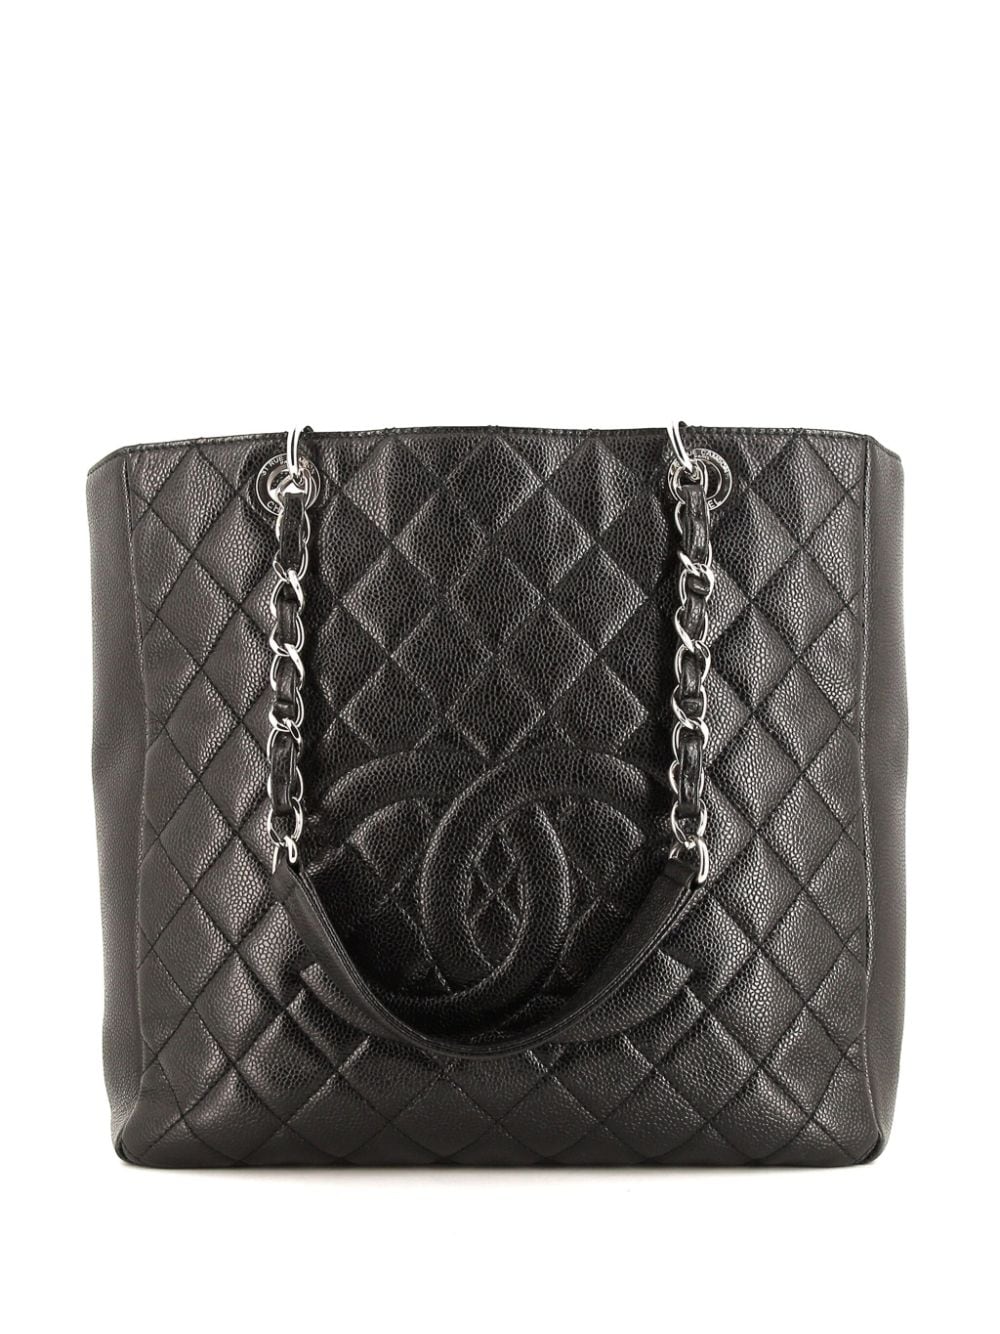 Pre-owned Chanel Grand Shopping 托特包（2013年典藏款） In Black